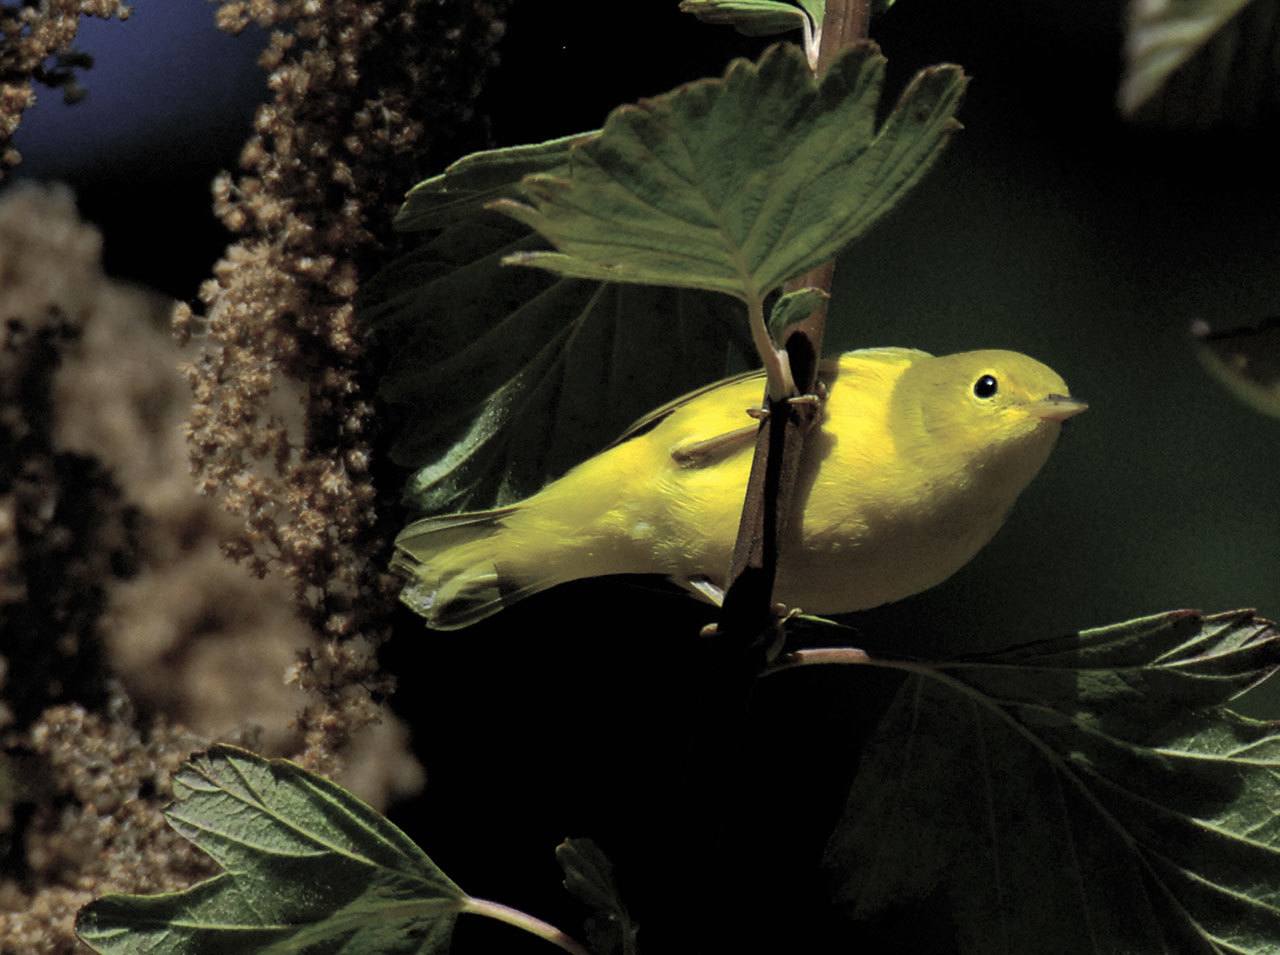 Craig Johnson photo — A yellow warbler perches on a branch.